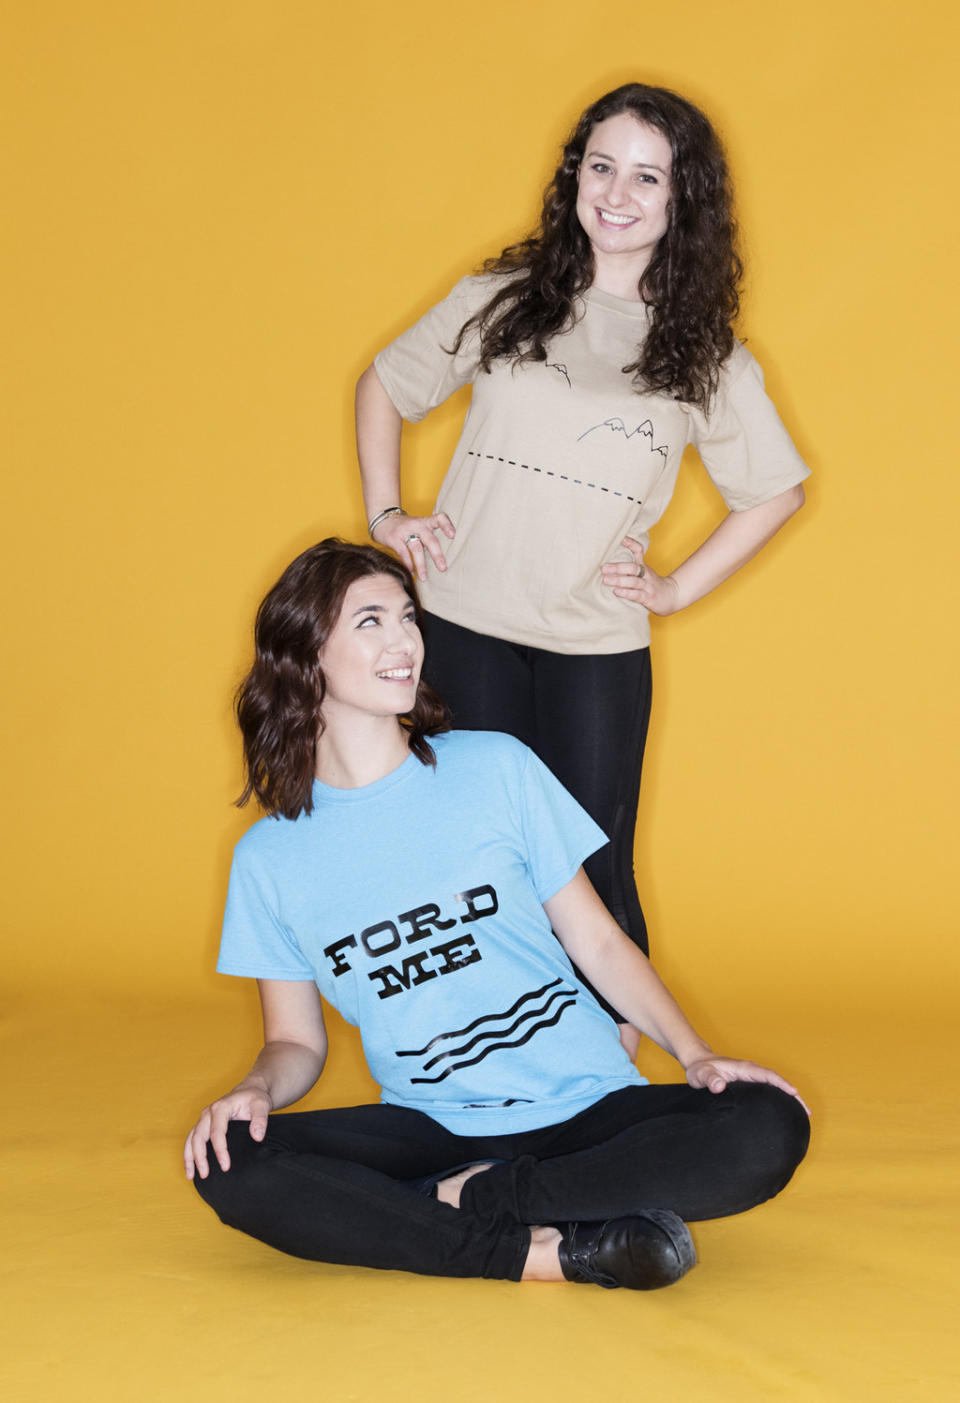 Seated woman wearing a "Ford Me" T-shirt next to a woman wearing a hilly T-shirt